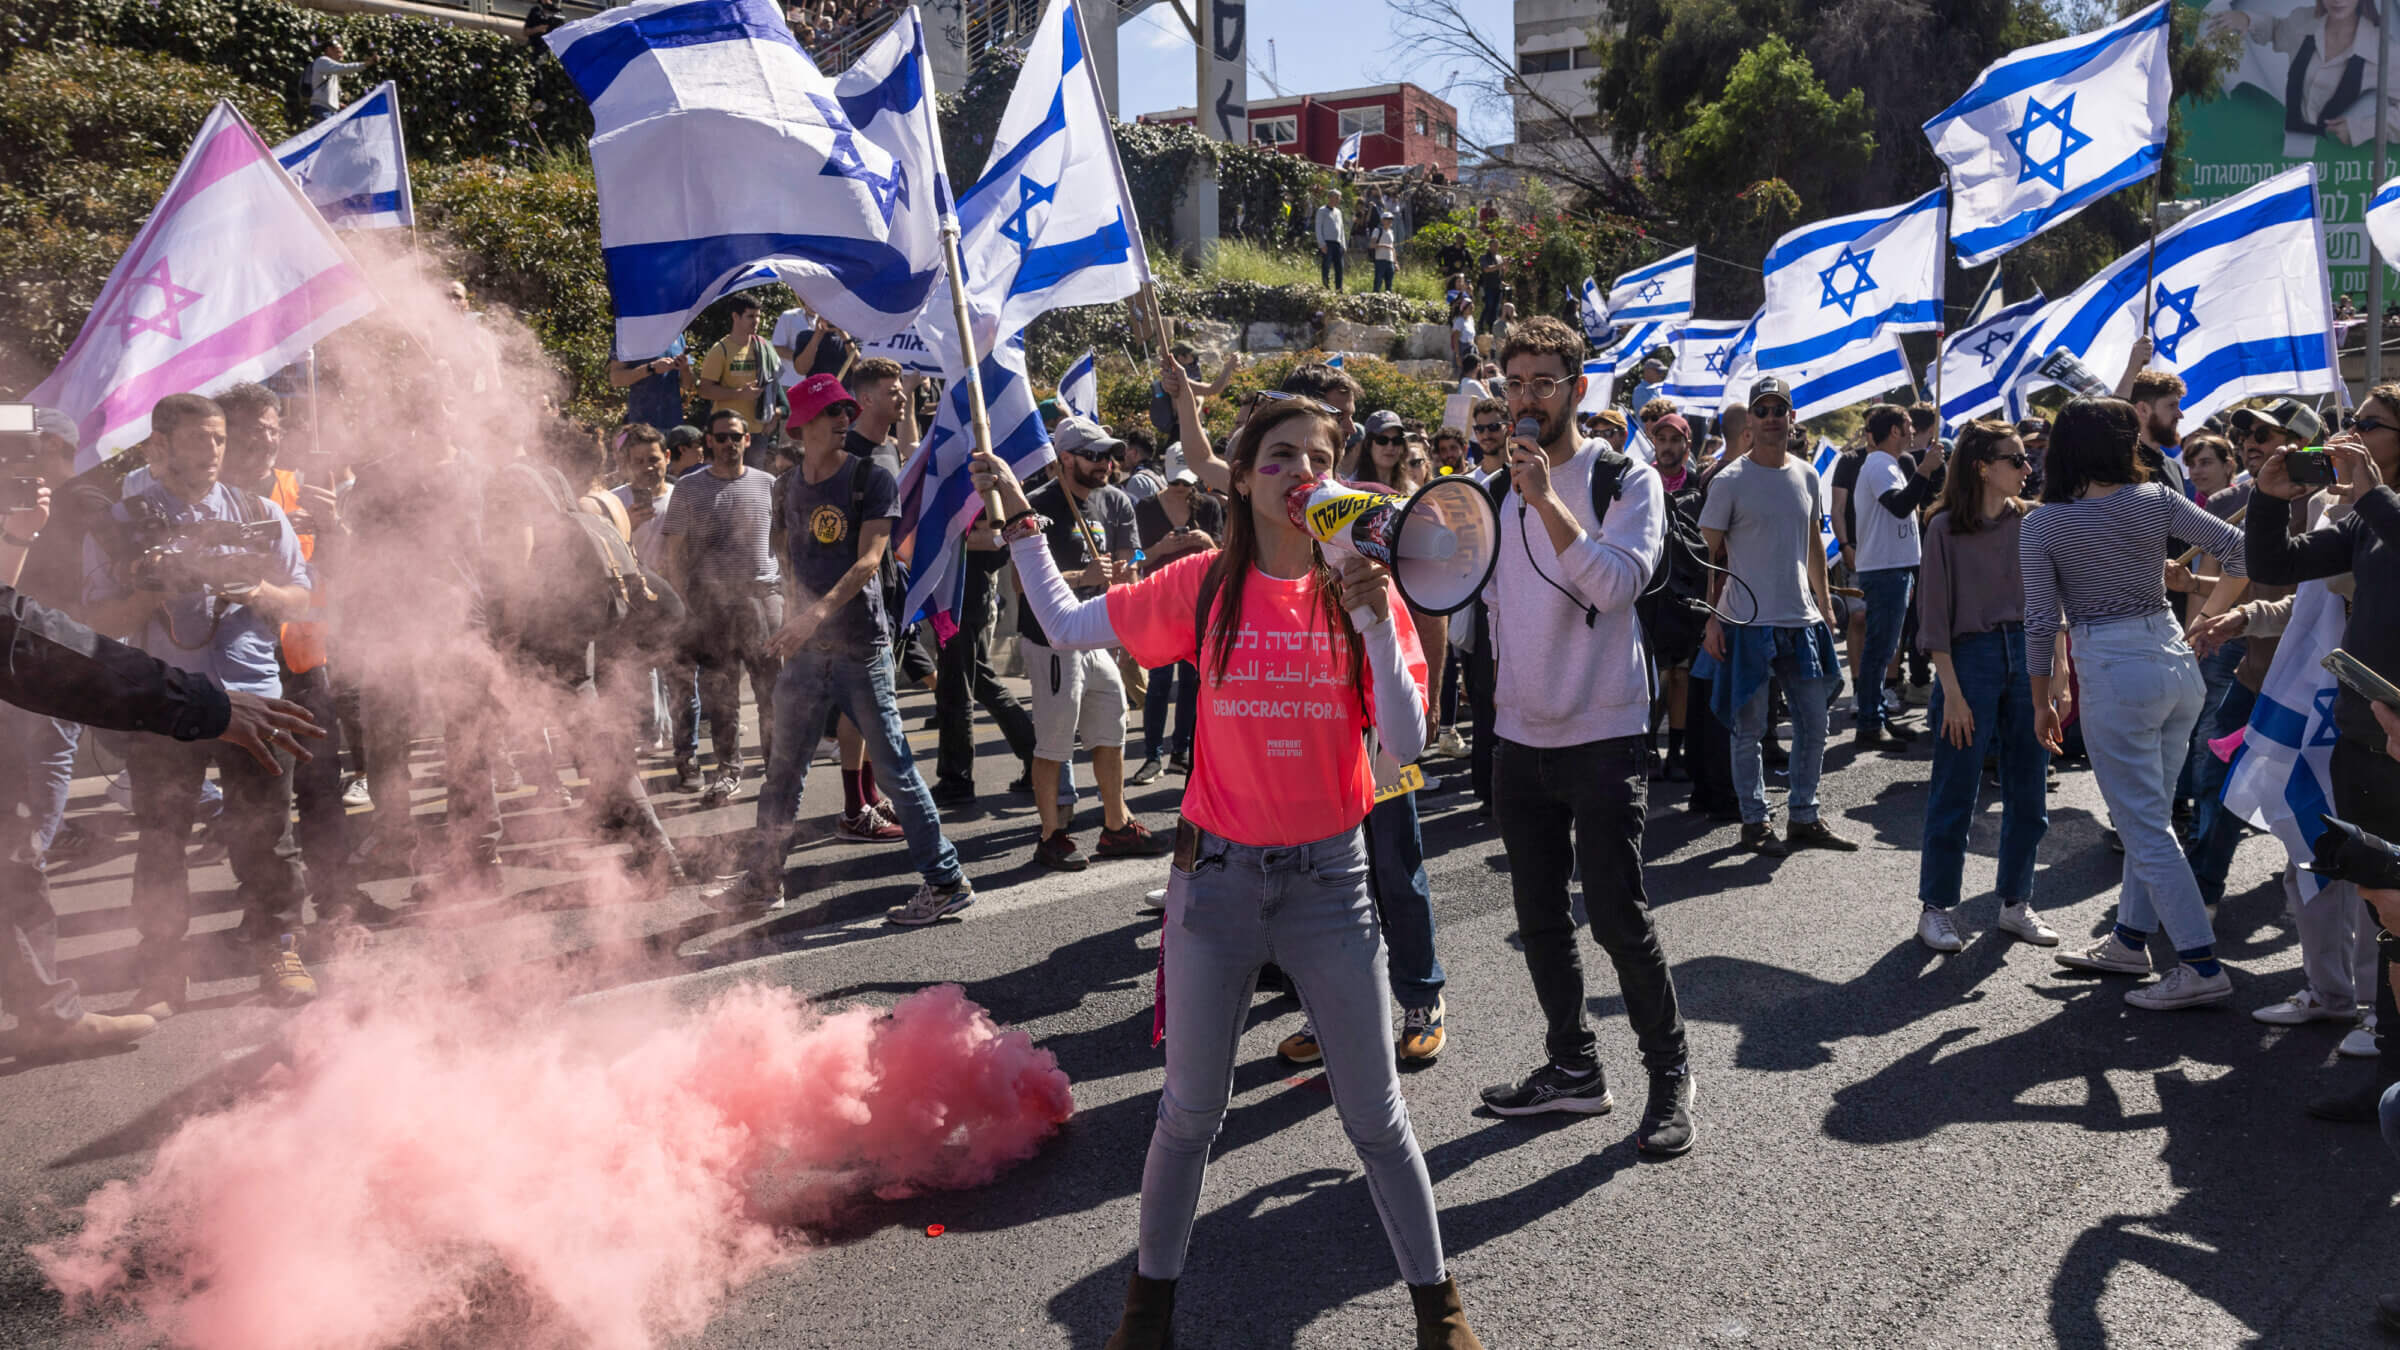 Demonstrators wave Israeli national flags and set off smoke bombs during a protest, by tech workers against proposed judicial reforms, in Tel Aviv on March 9. Several Israeli technology firms have moved assets out of Israel as a result of the push for a court overhaul, prompting questions about what counts as a boycott of the Jewish state.